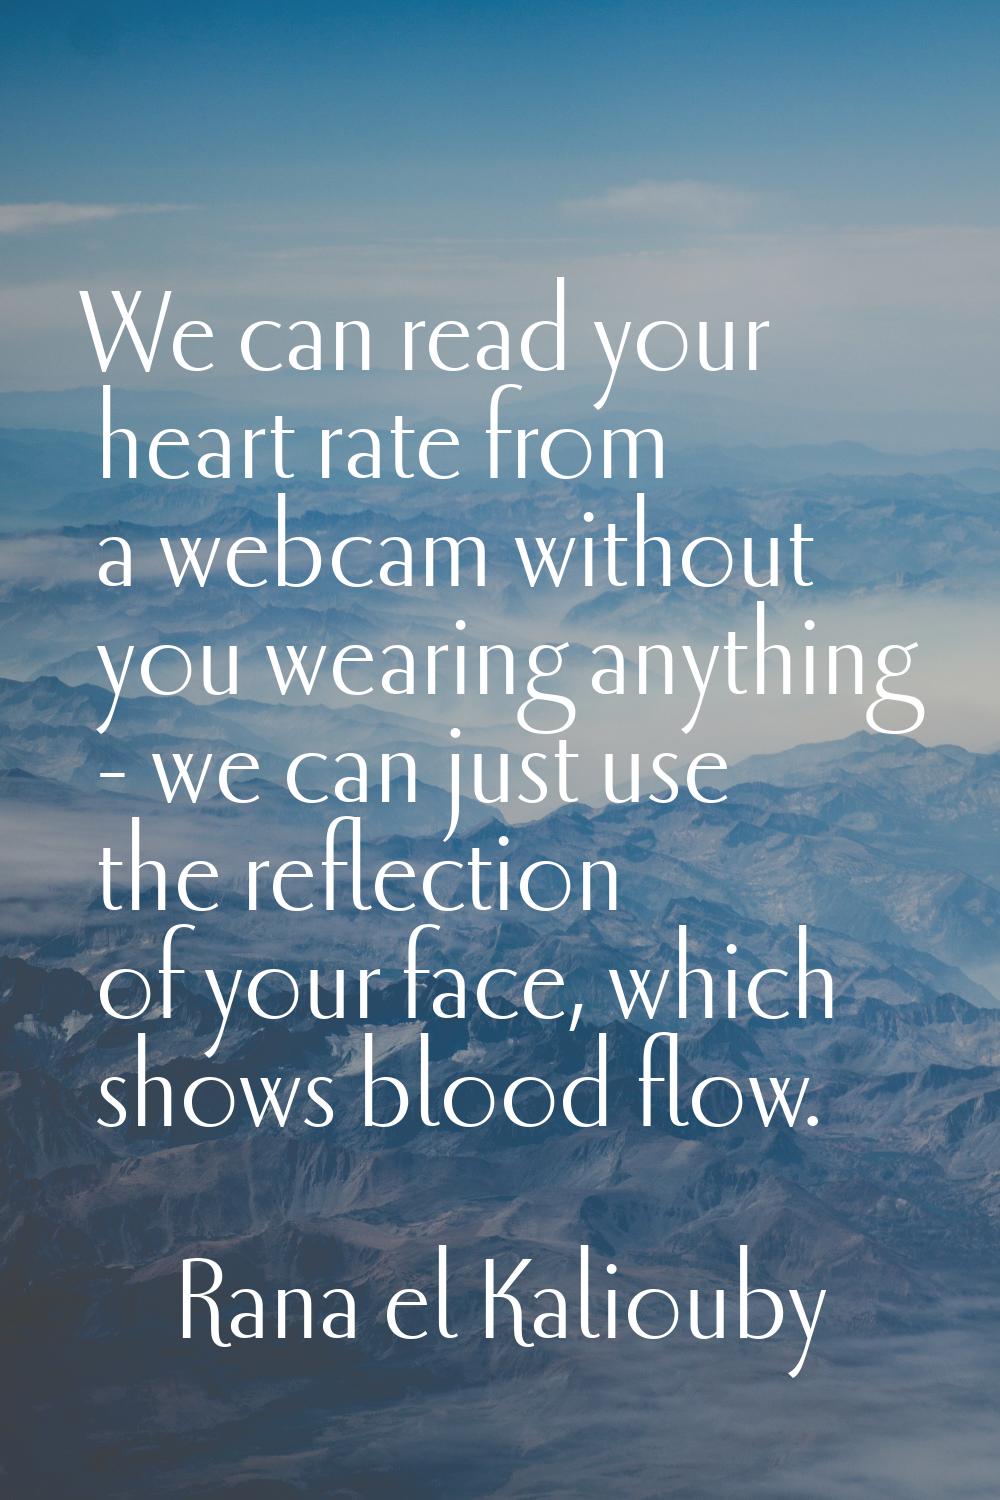 We can read your heart rate from a webcam without you wearing anything - we can just use the reflec